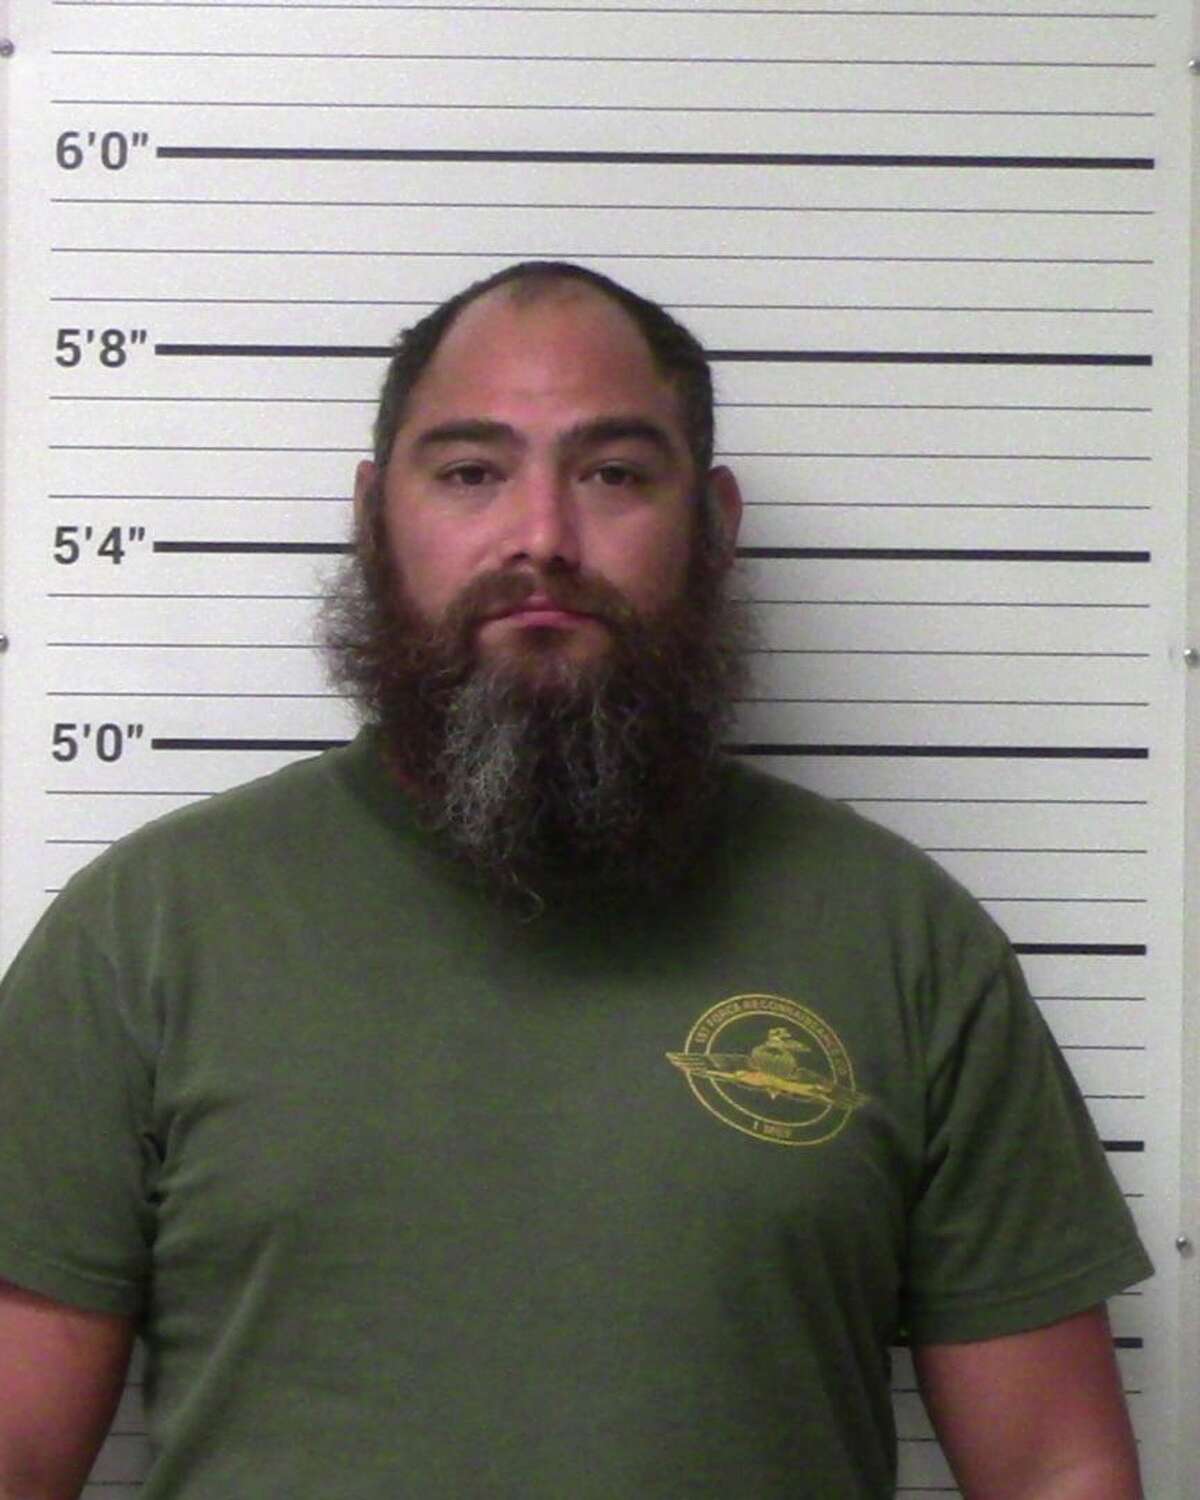 Joel Morin Jr., 41, was arrested during a prostitution sting by the Kerr County Sheriff's Office.